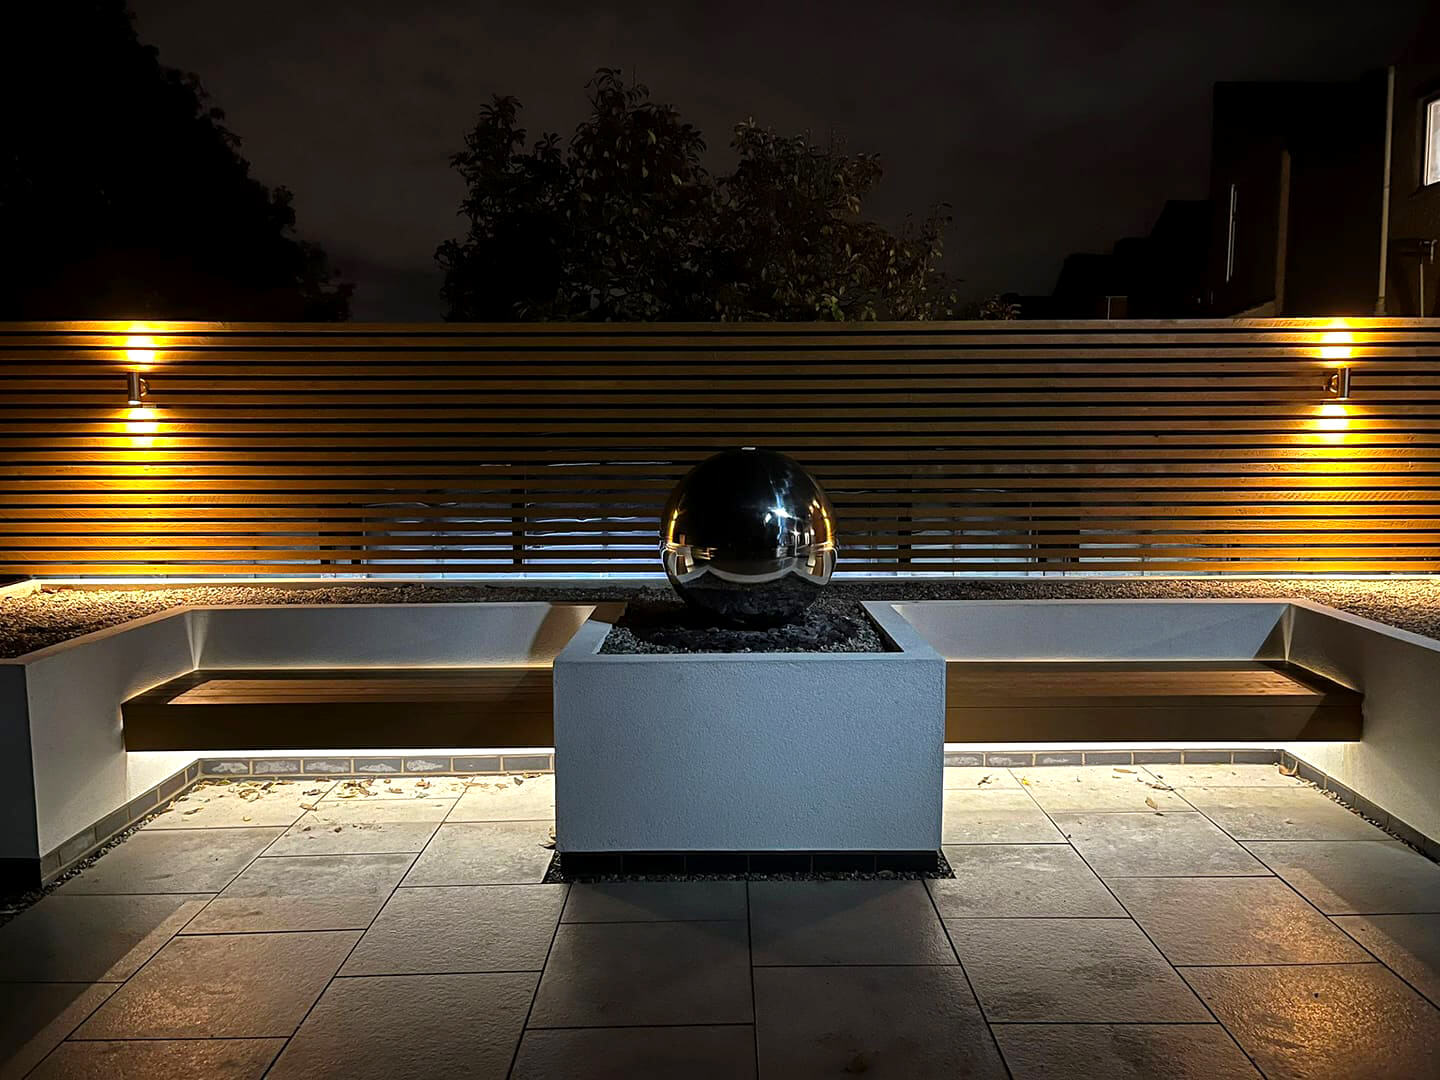 Garden Design Lighting with Raised Borders and Seating Area